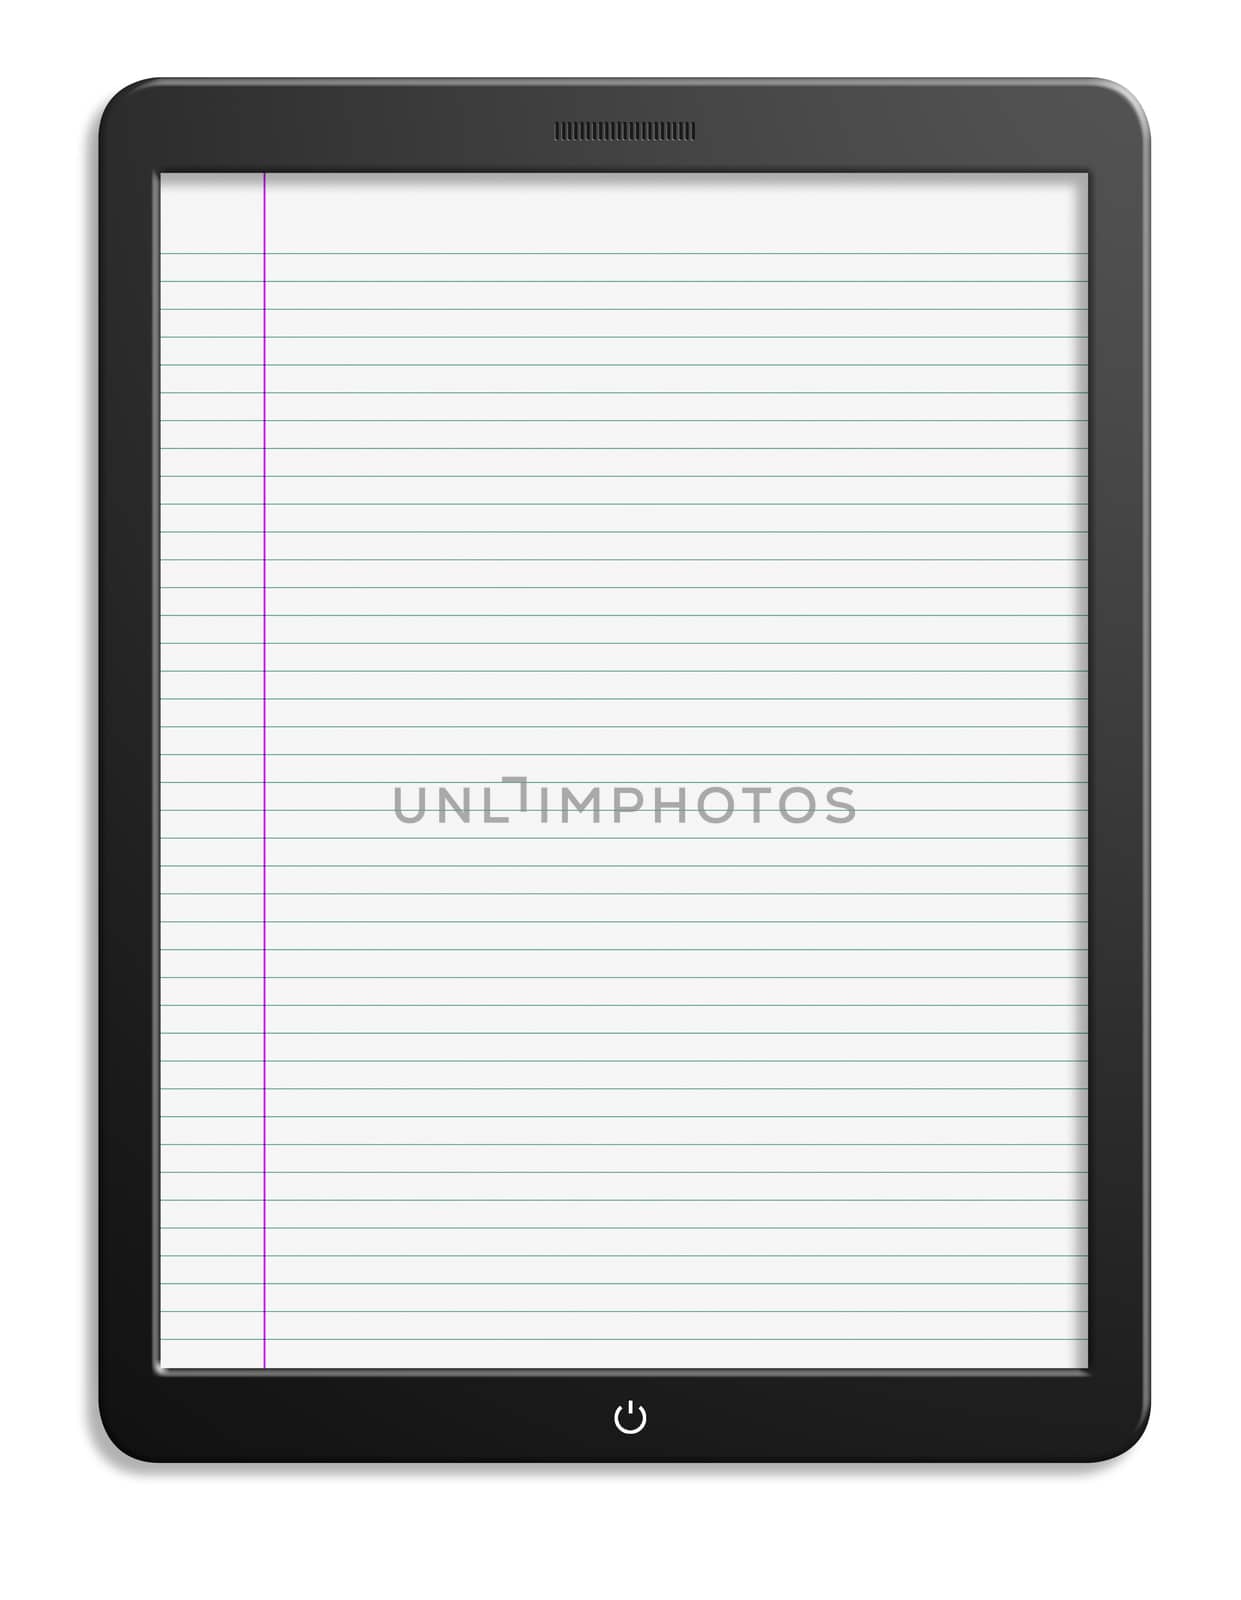 Modern computer tablet with paper screen. Isolated on white background